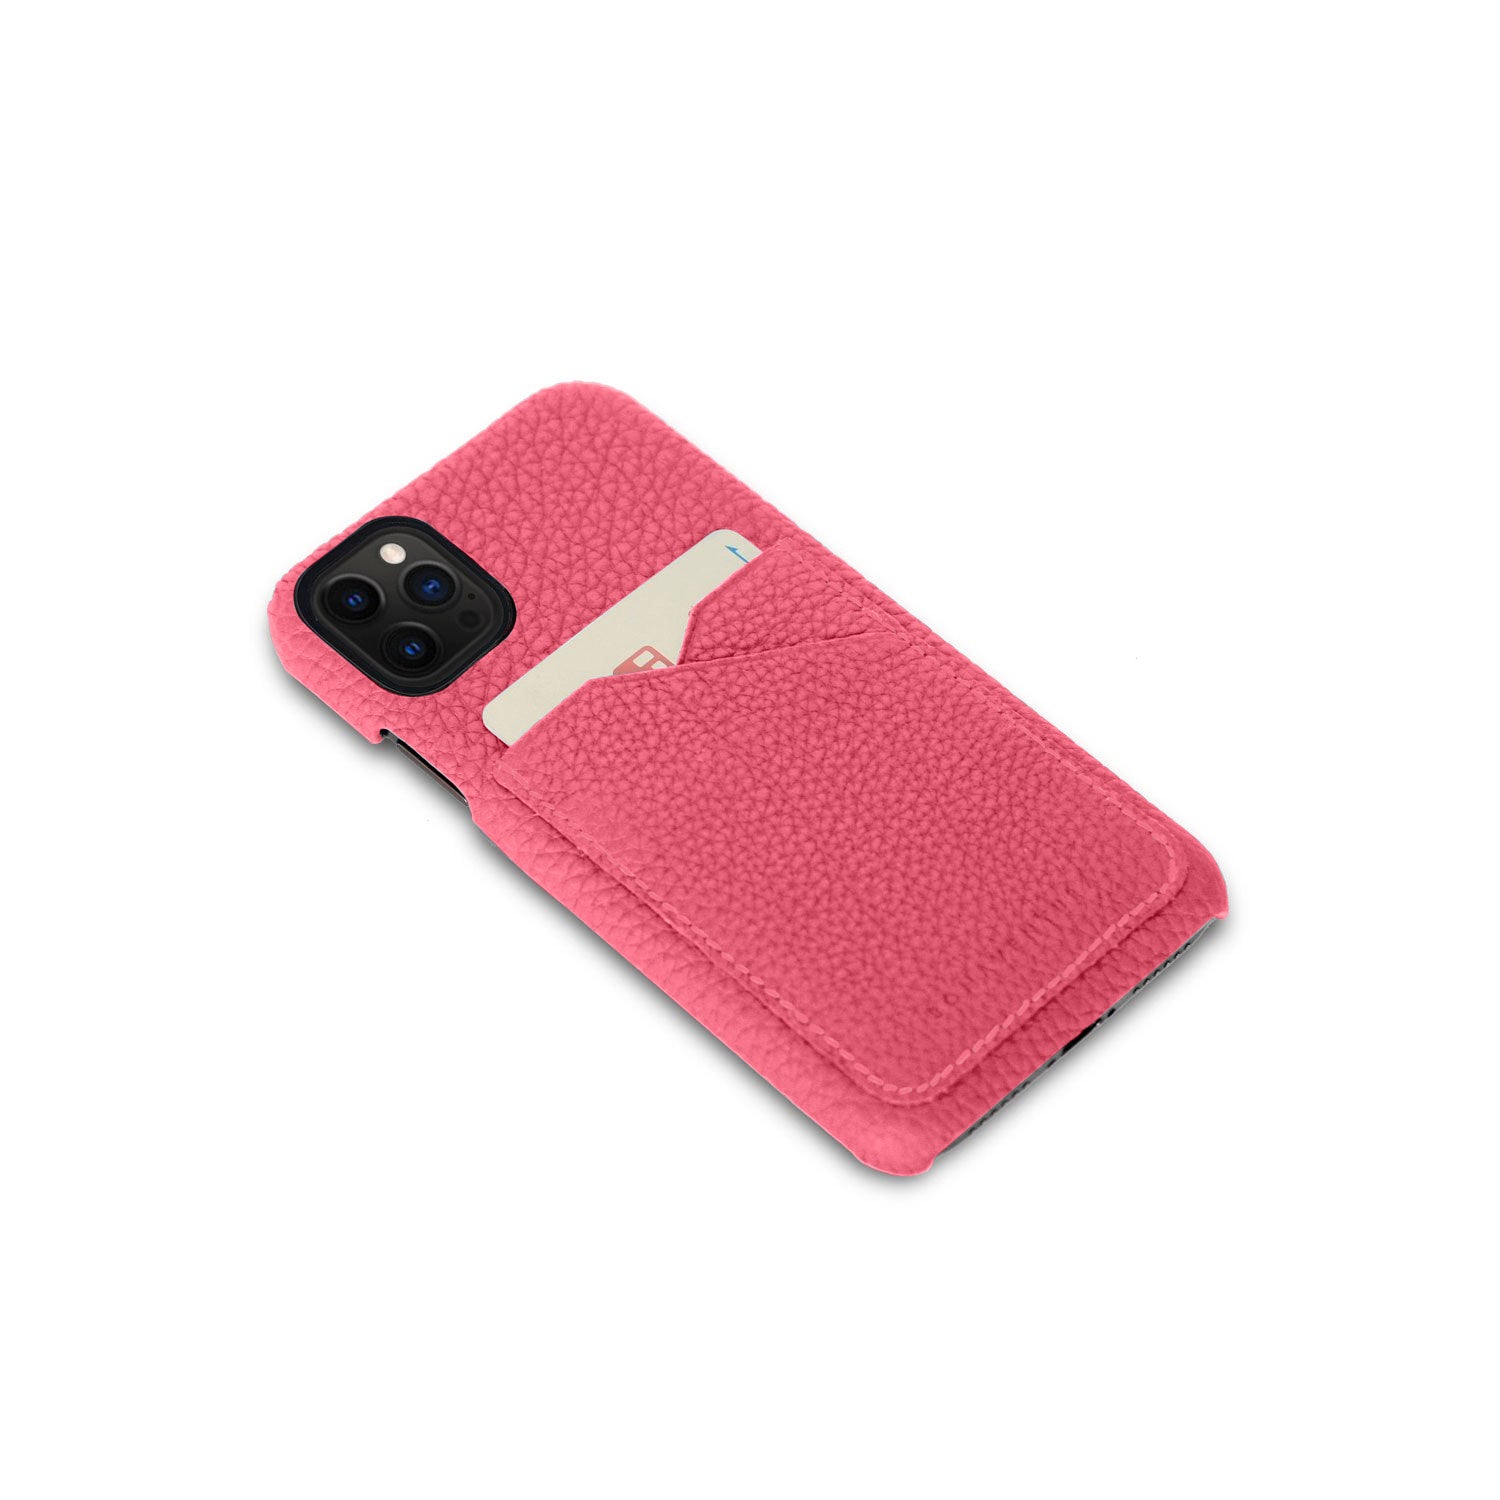 (iPhone 12 / 12 Pro) Back cover case Shrink leather